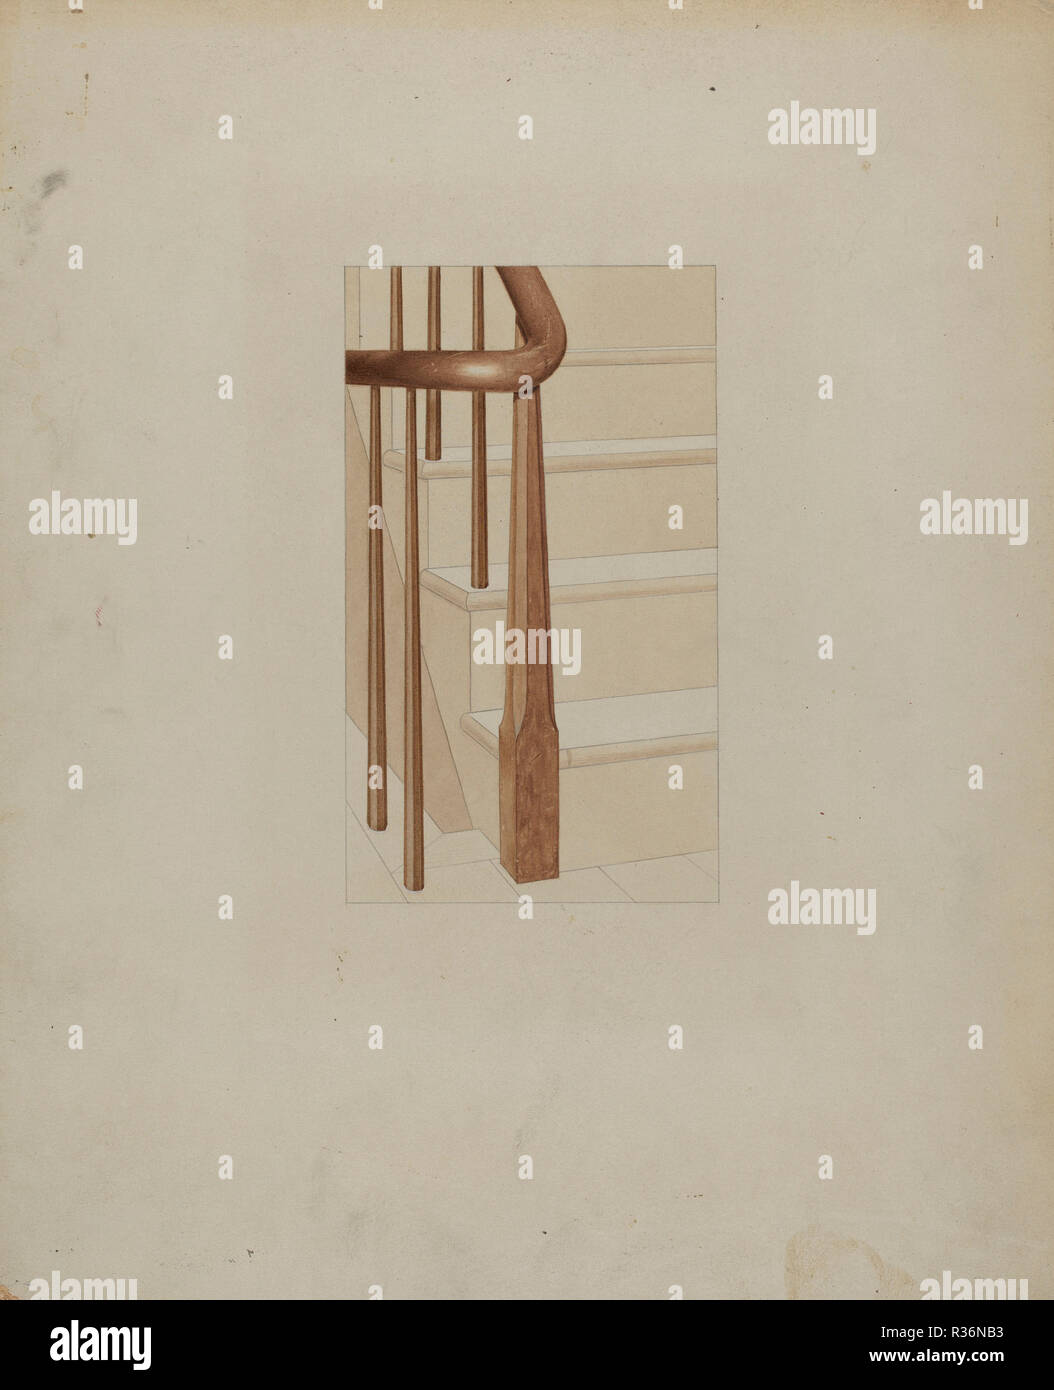 Shaker Newel Post. Dated: c. 1937. Dimensions: overall: 27.8 x 22.8 cm (10 15/16 x 9 in.). Medium: watercolor and graphite on paperboard. Museum: National Gallery of Art, Washington DC. Author: John W. Kelleher. Stock Photo